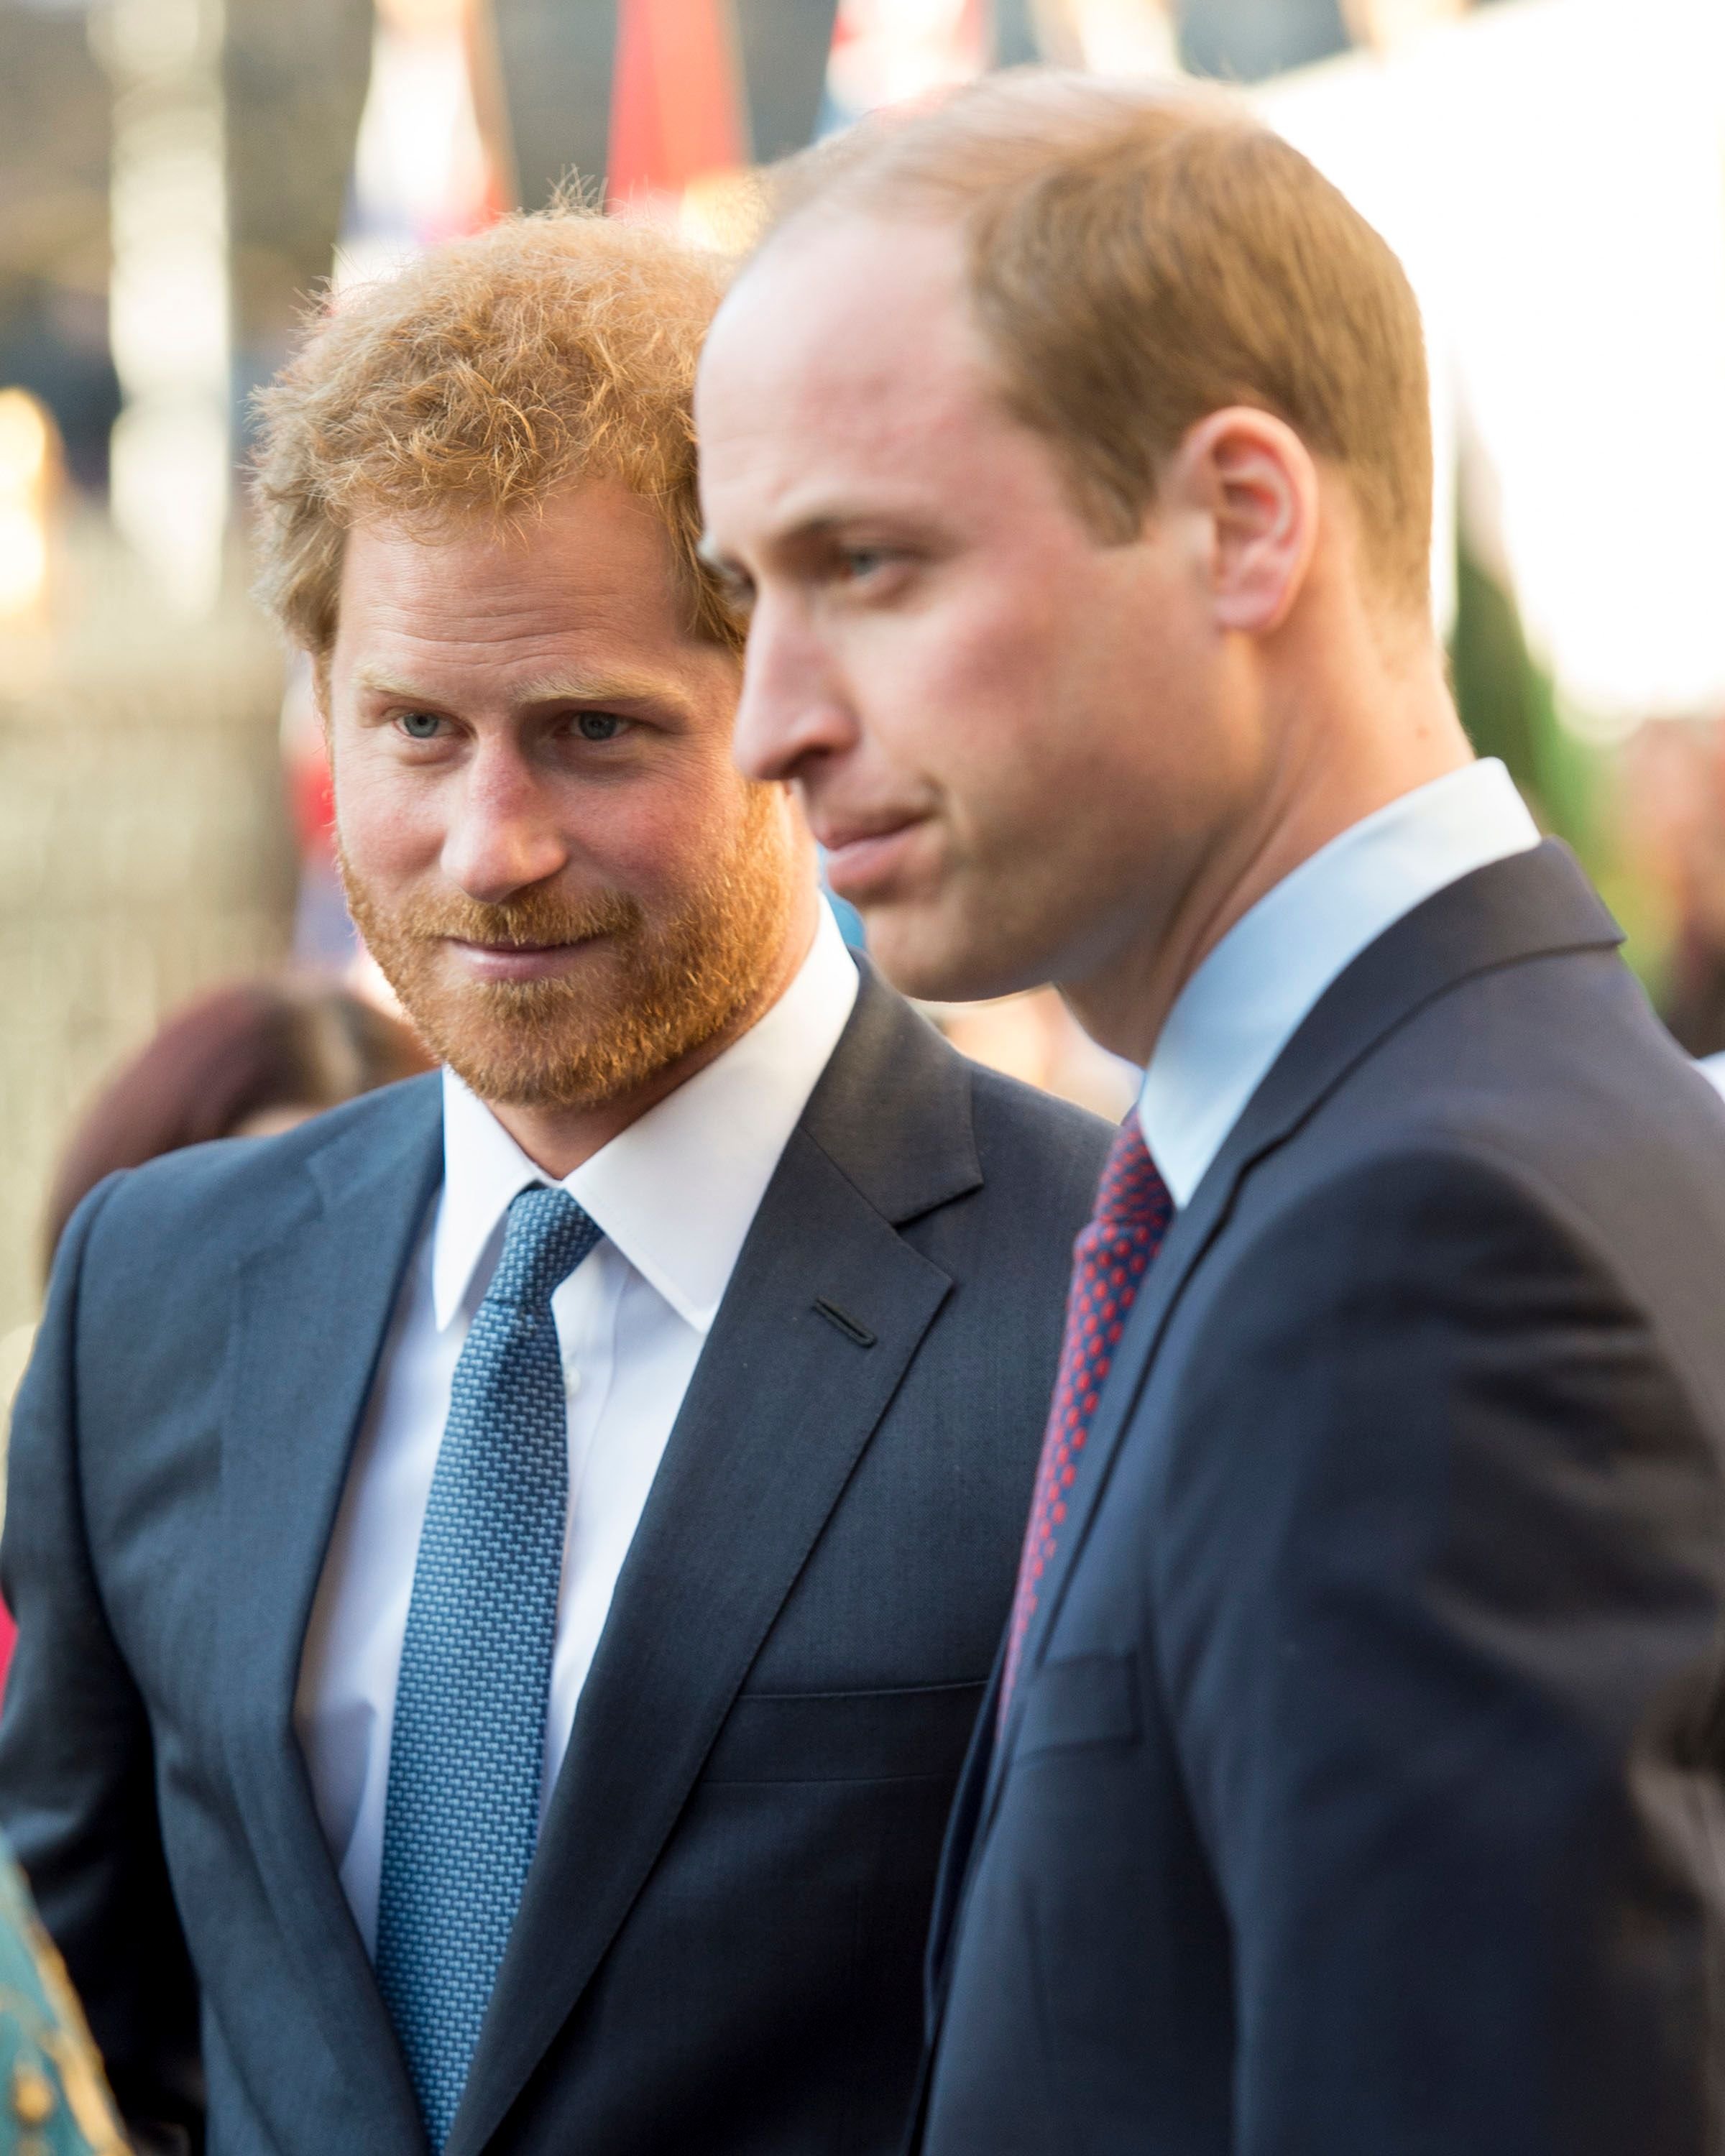 Prince Harry and Prince William at the Commonwealth Observance Day Service on March 14, 2016, in London, United Kingdom | Photo: Mark Cuthbert/UK Press/Getty Images